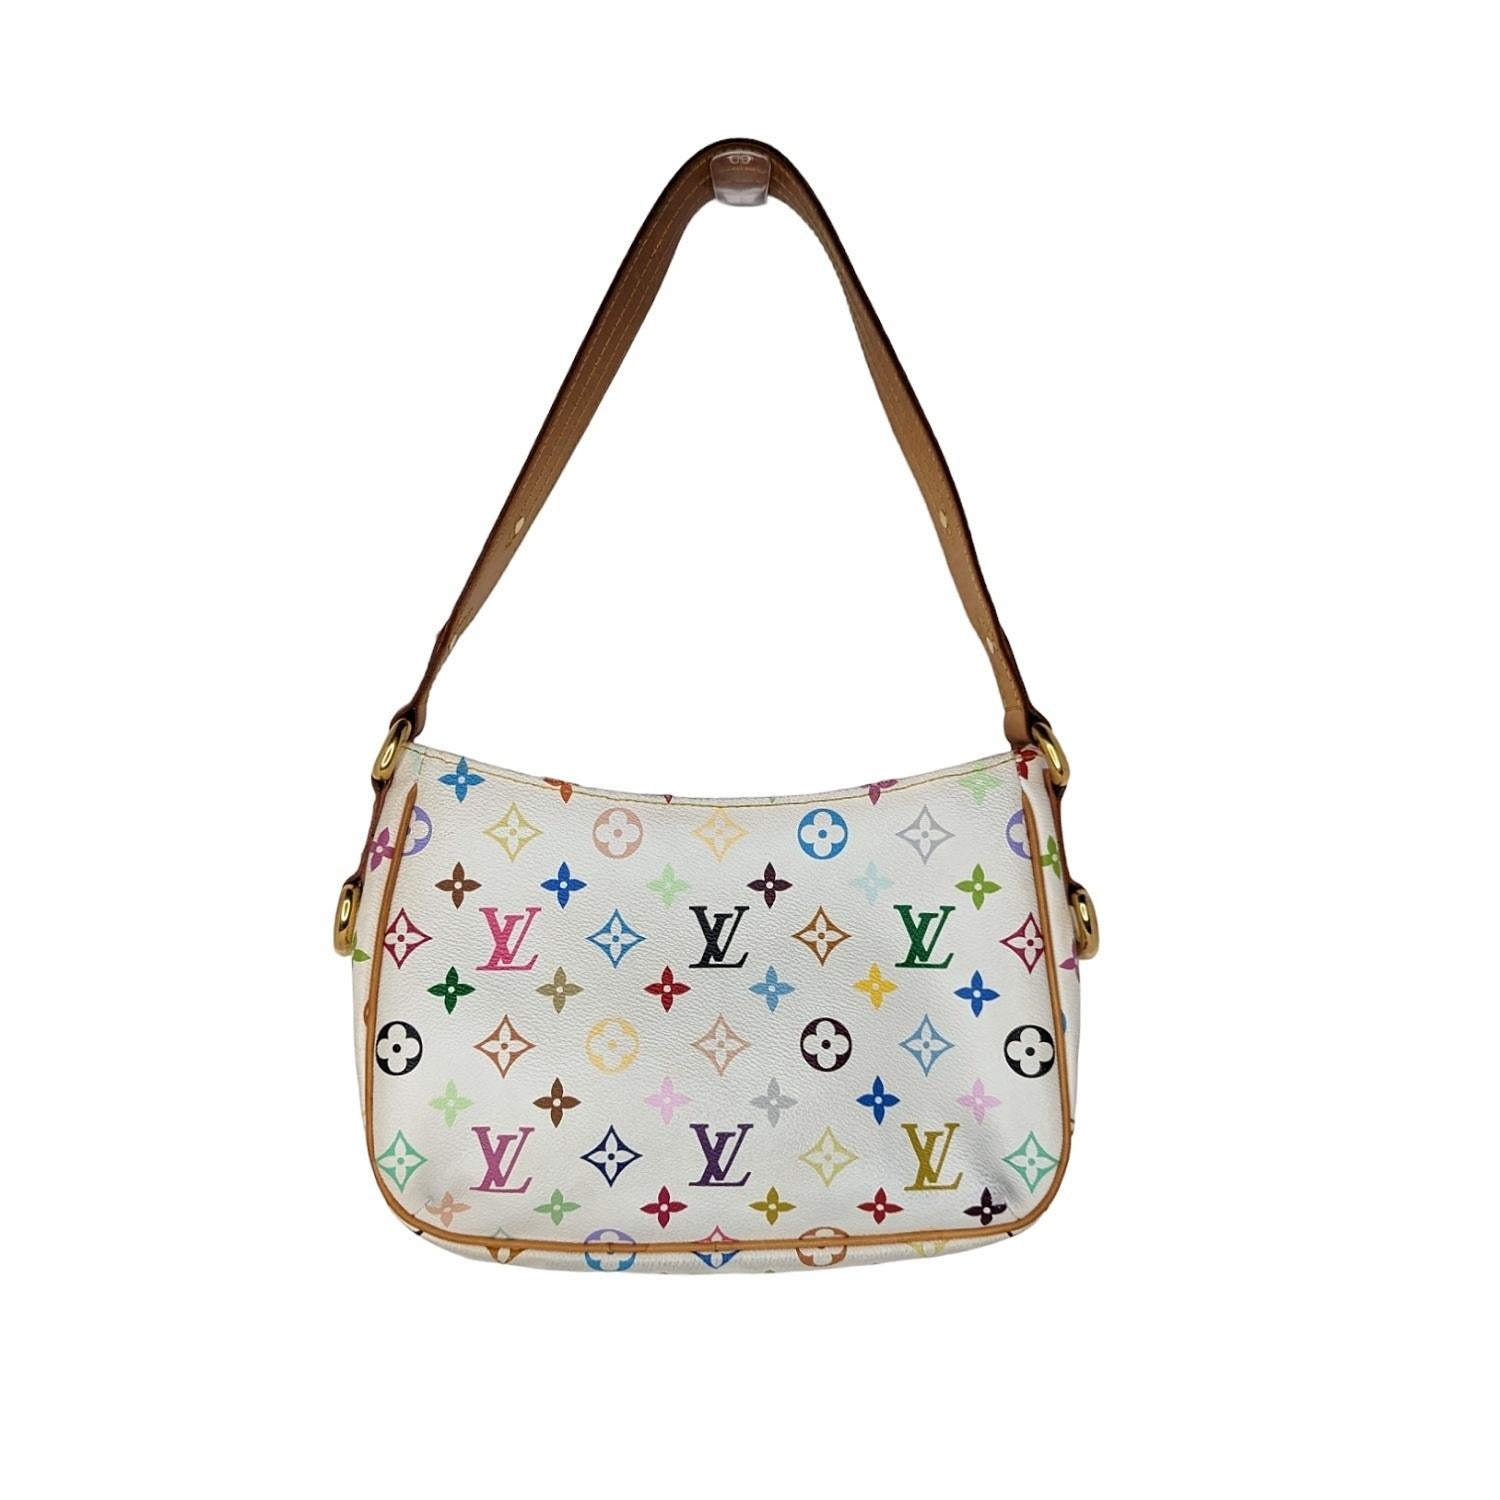 This feminine shoulder bag is crafted of Louis Vuitton monogram multicolore in 33 vibrant colors on white toile canvas. The shoulder bag features a vachetta leather shoulder strap, trim, and belts, two exterior flap pockets, and polished brass